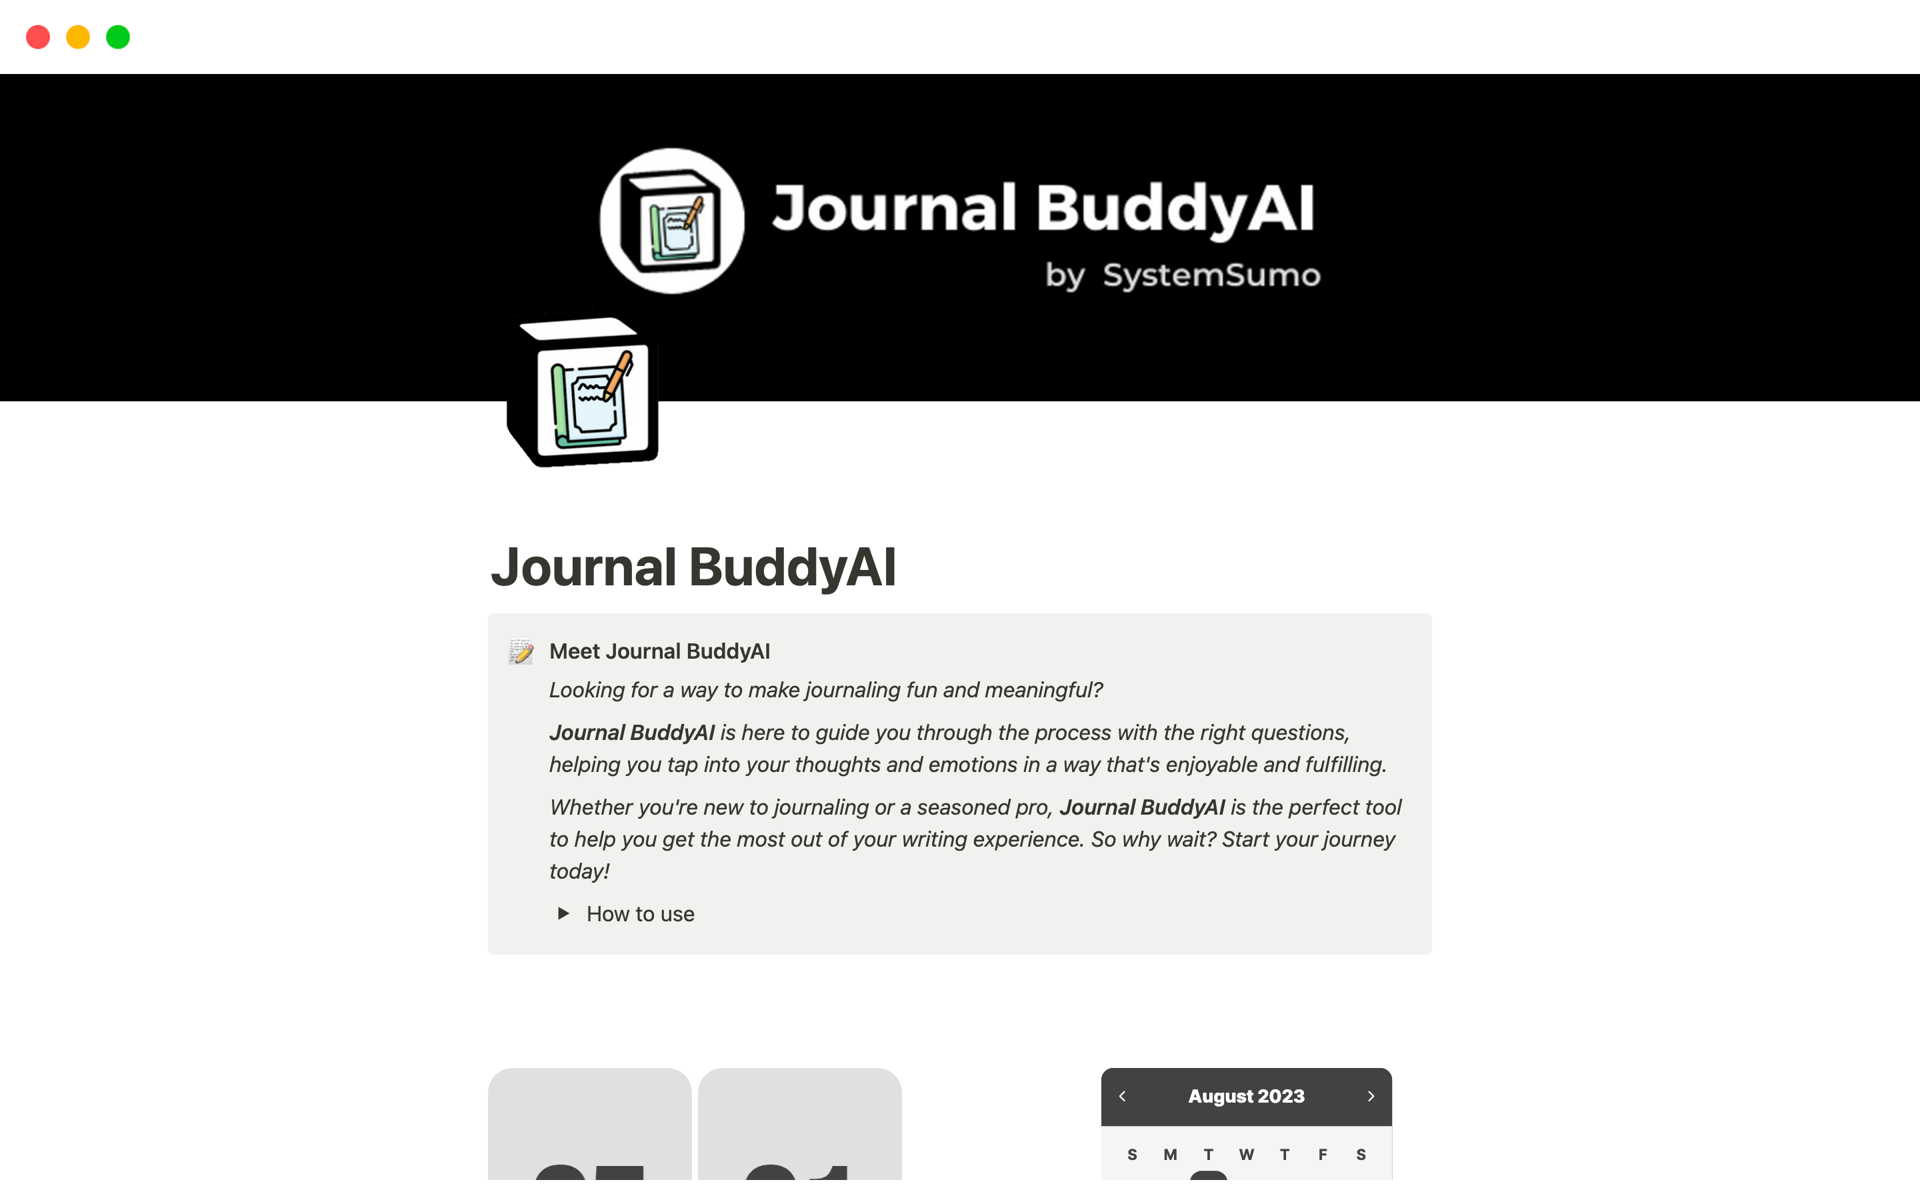 Journal BuddyAI is your assistant that uses Notion AI to generate relevant and thought-provoking questions tailored to your journal topic and mood so you can focus on writing.